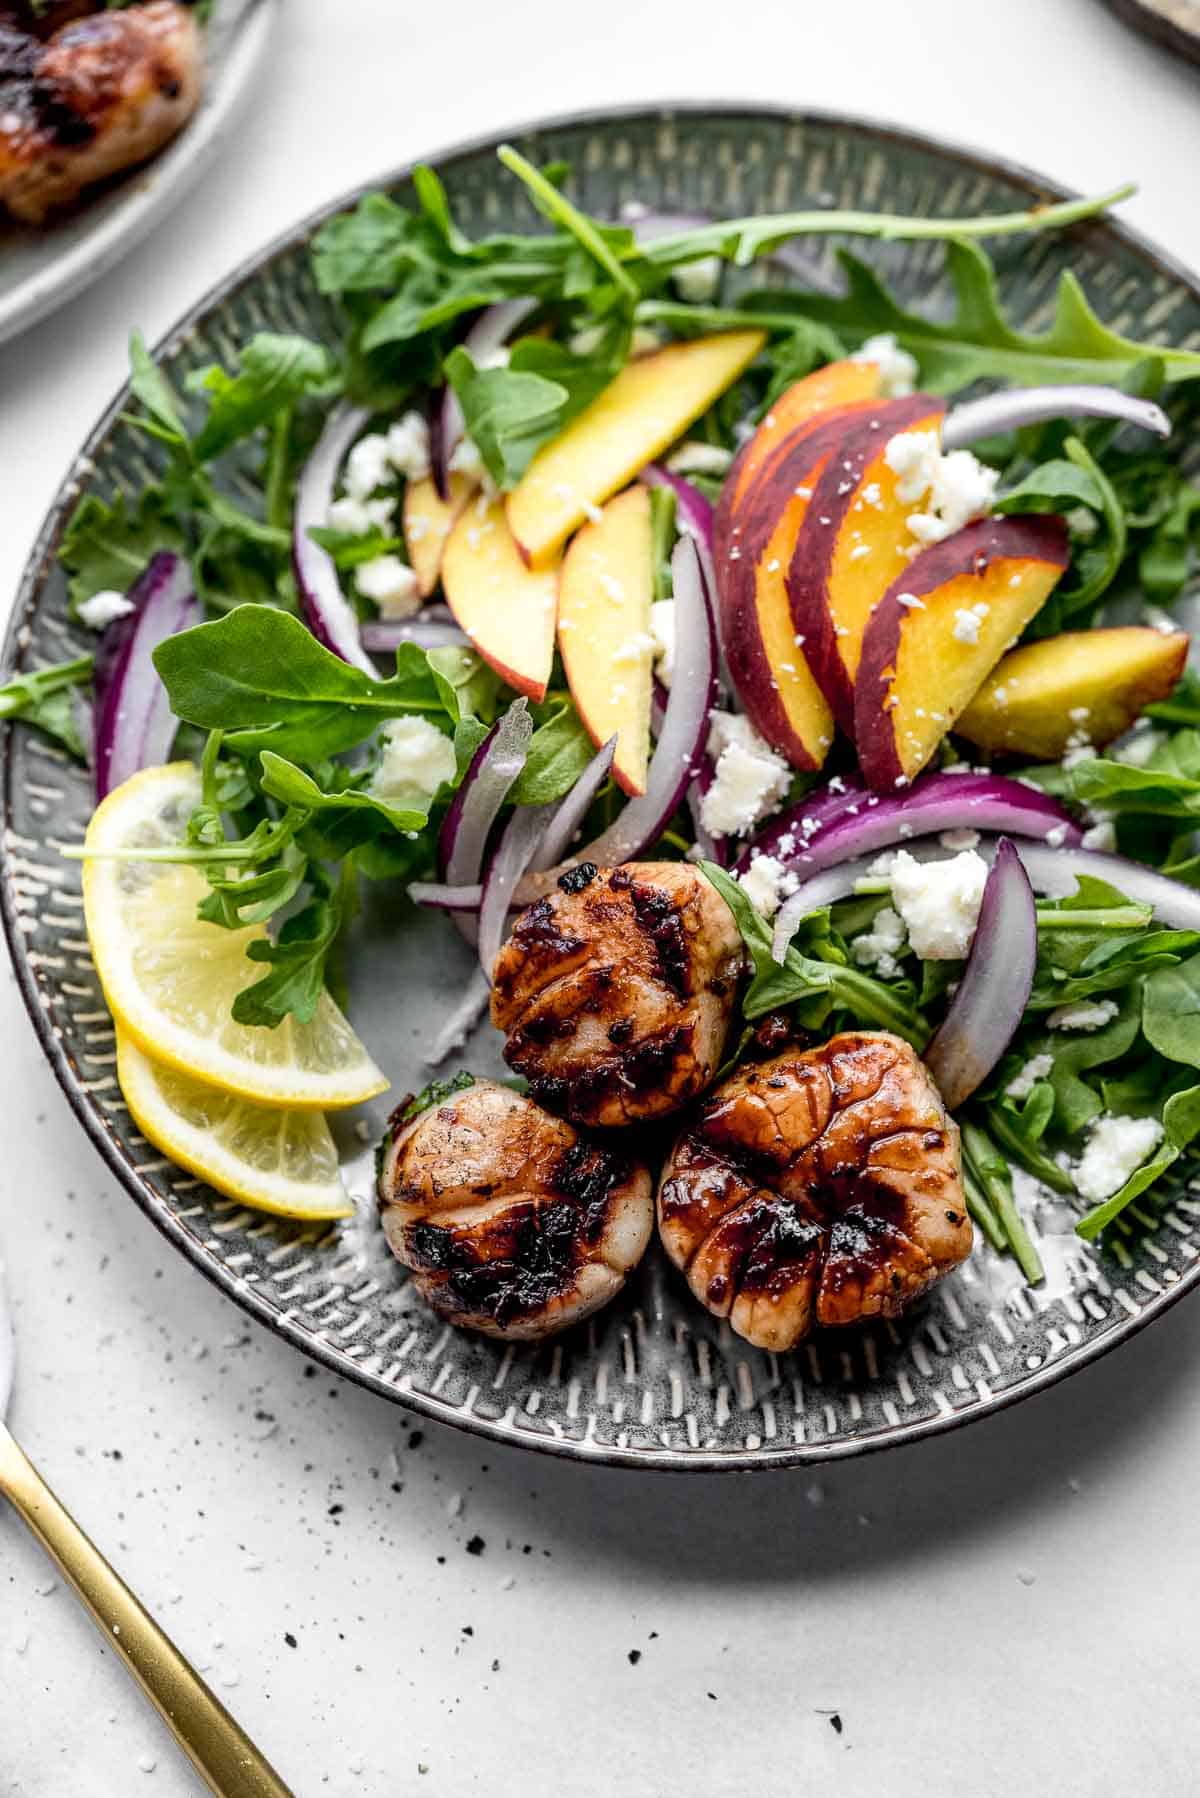 grilled scallops with peach salad.